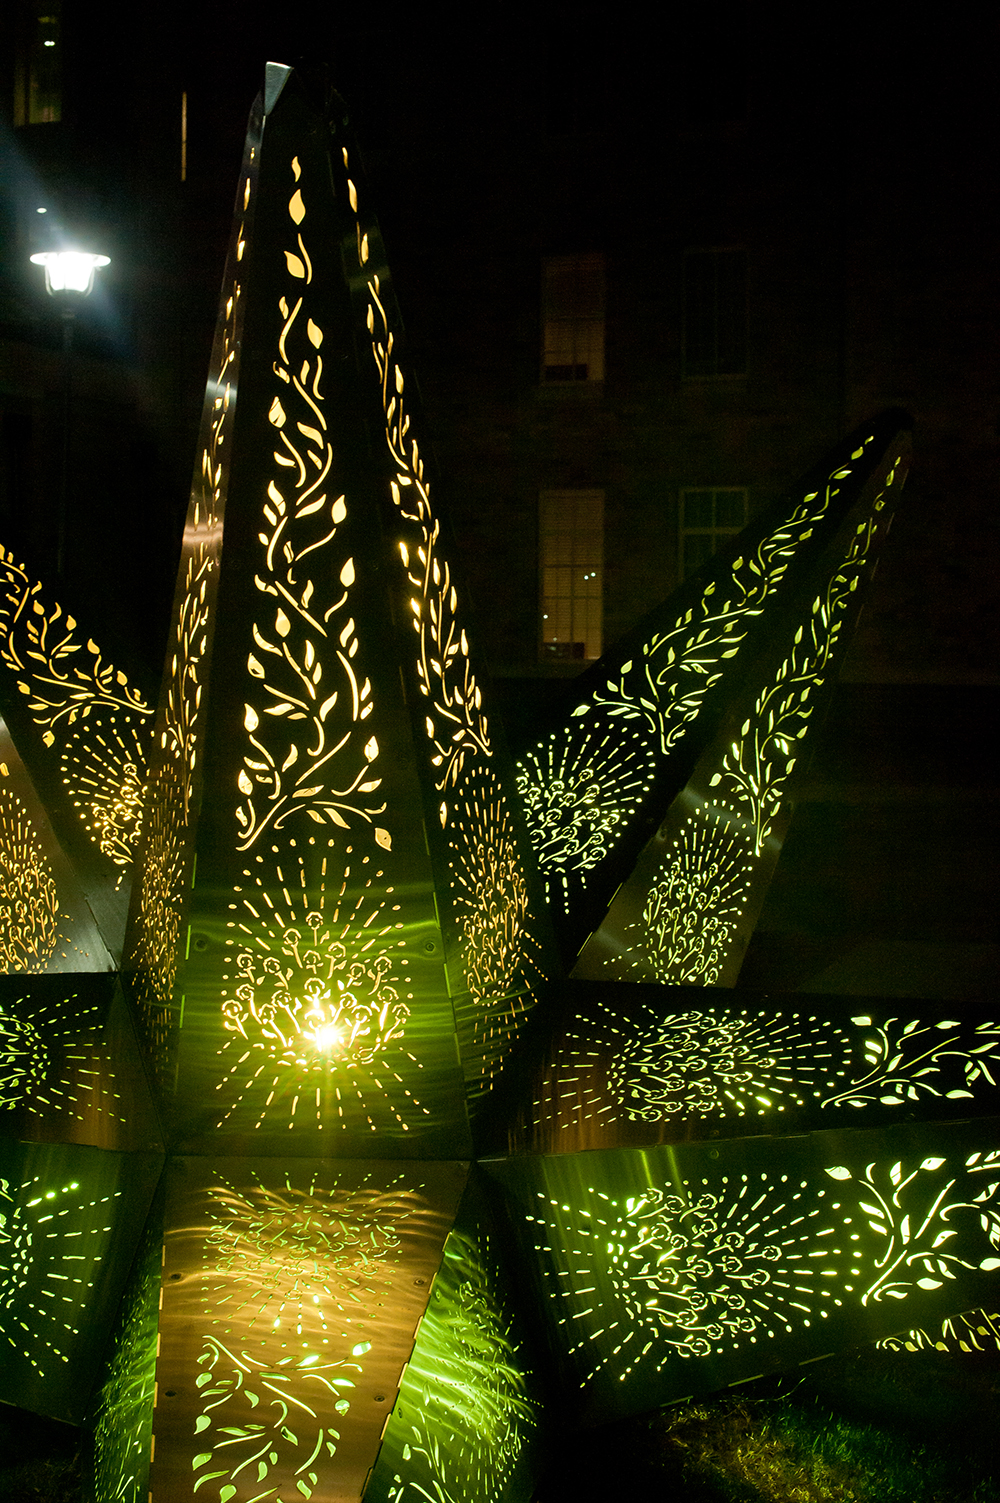 star sculpture lit up at night, yellow turning into green.